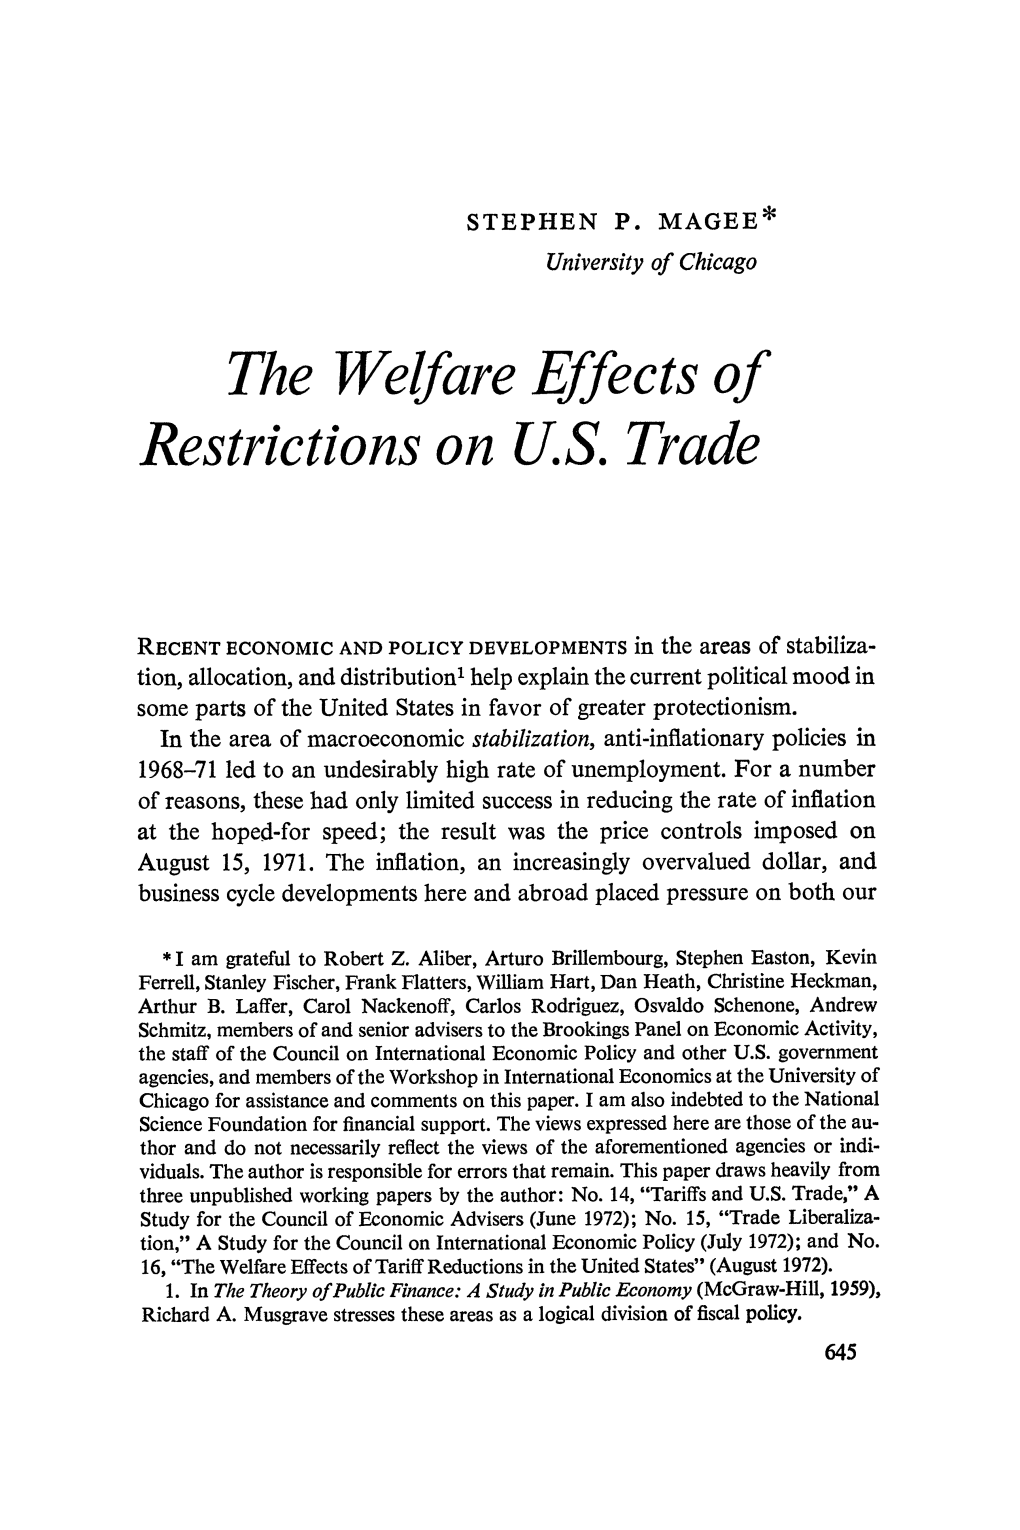 The Welfare Effects of Restrictions on U.S. Trade